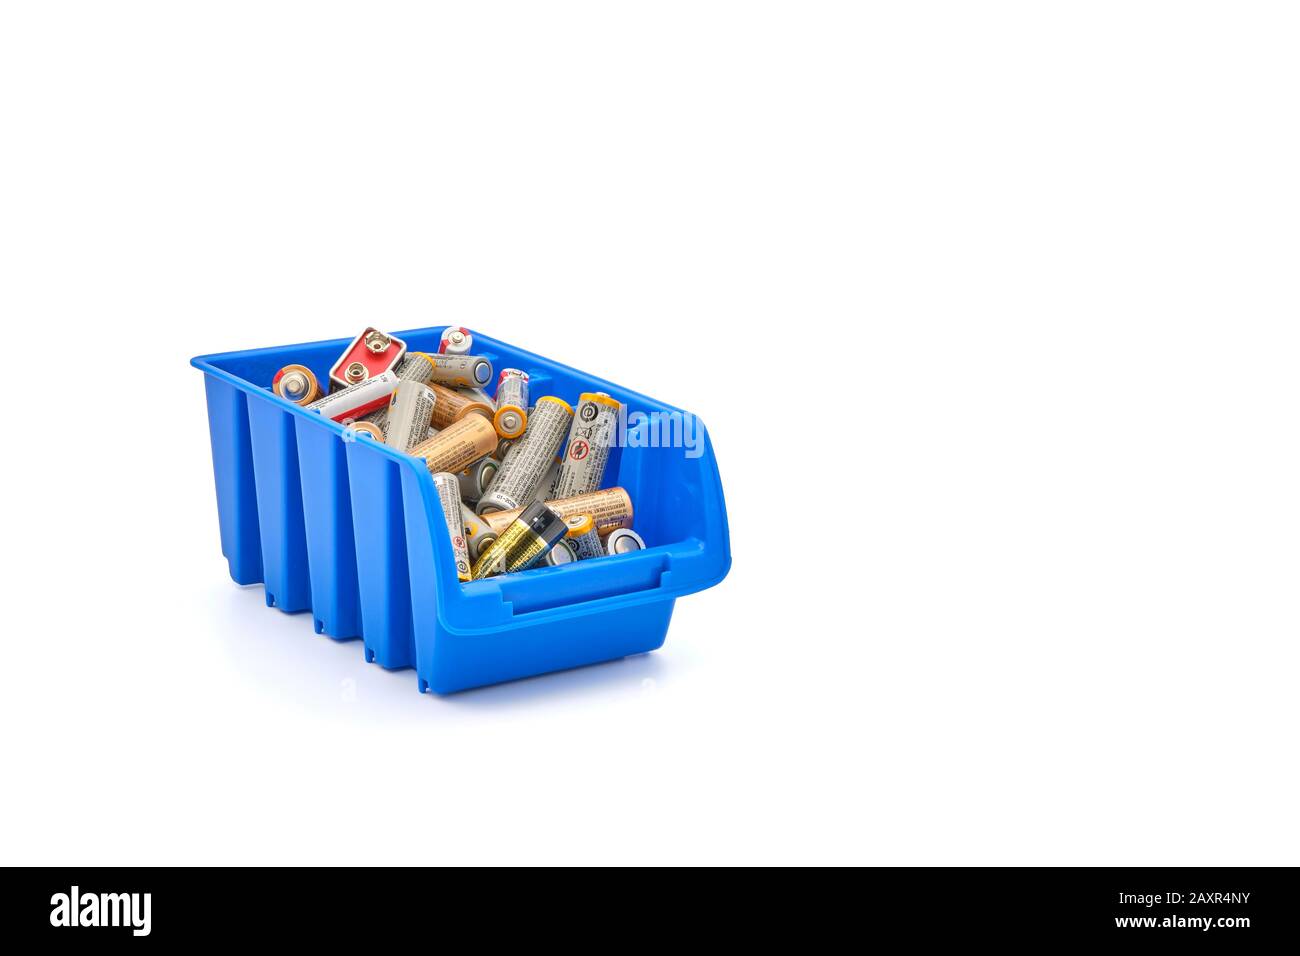 Many depleted batteries in a blue recycle bin photographed on a white background. Stock Photo